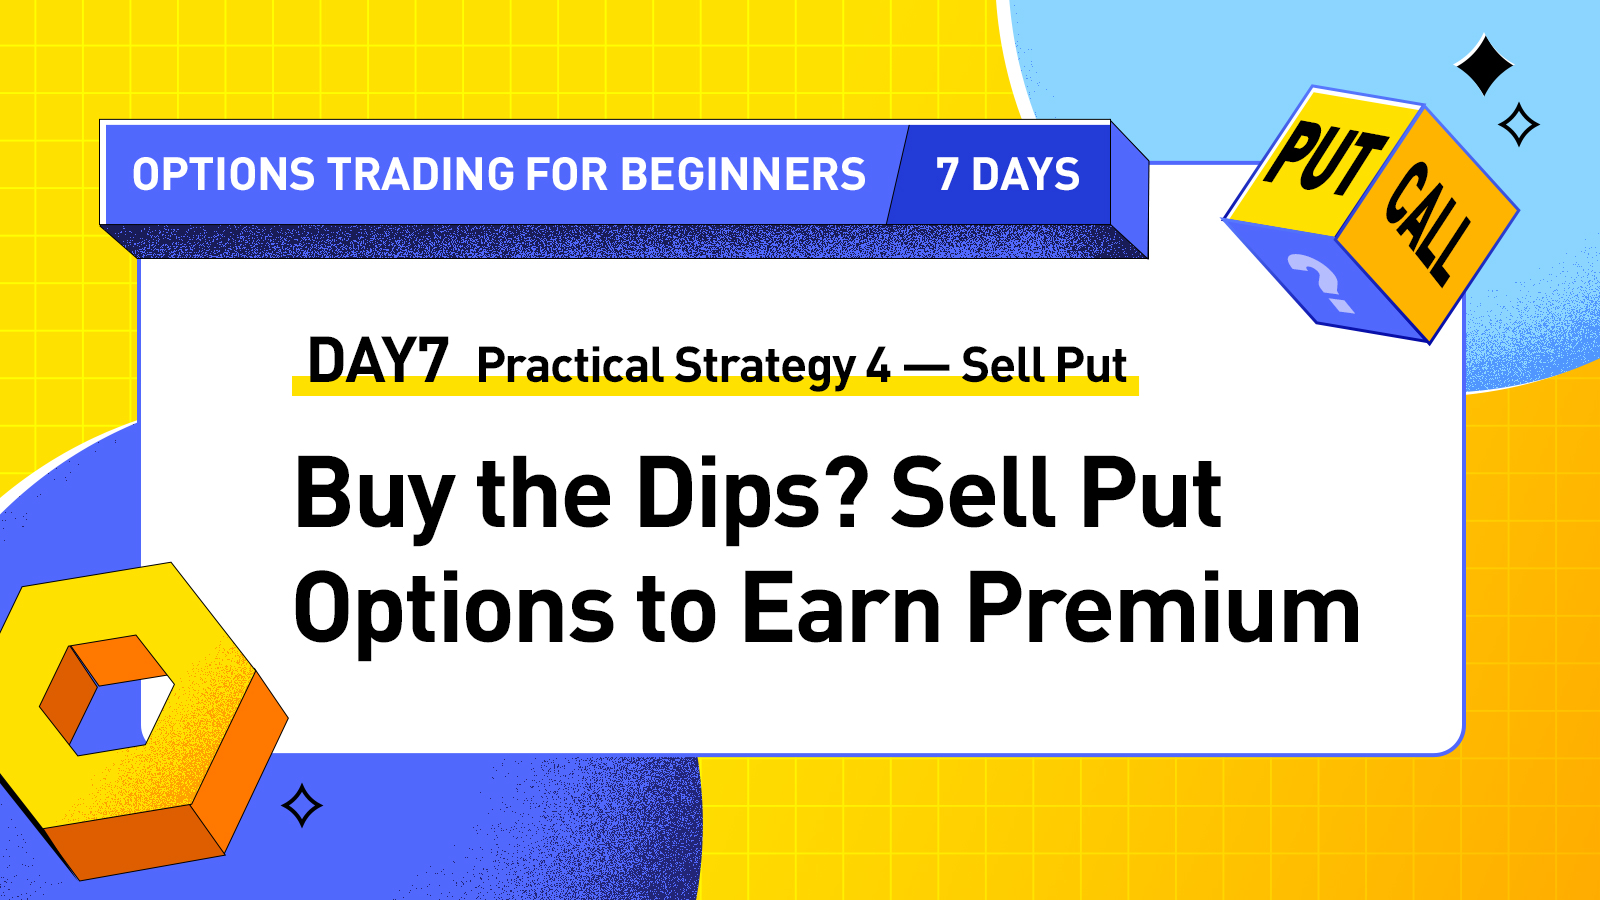 DAY7 - Practical Strategy 4: Buy the Dips? Sell Put Options to Earn Premium (Sell Put)